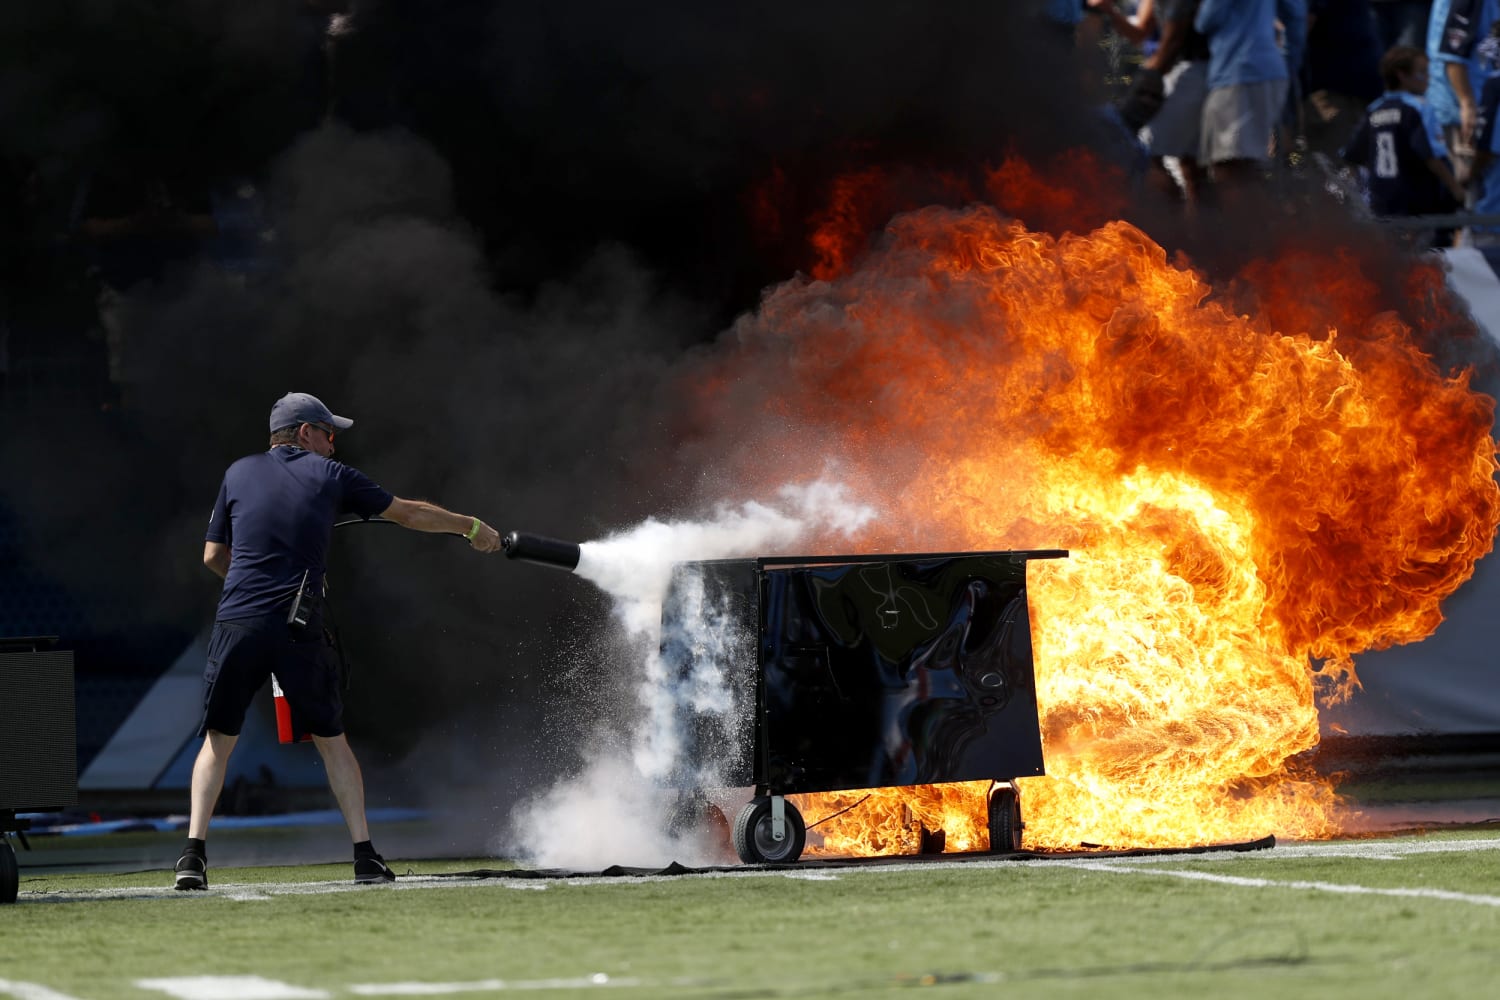 VIDEO: Pyrotechnics Set Field Ablaze Before Titans-Colts Game